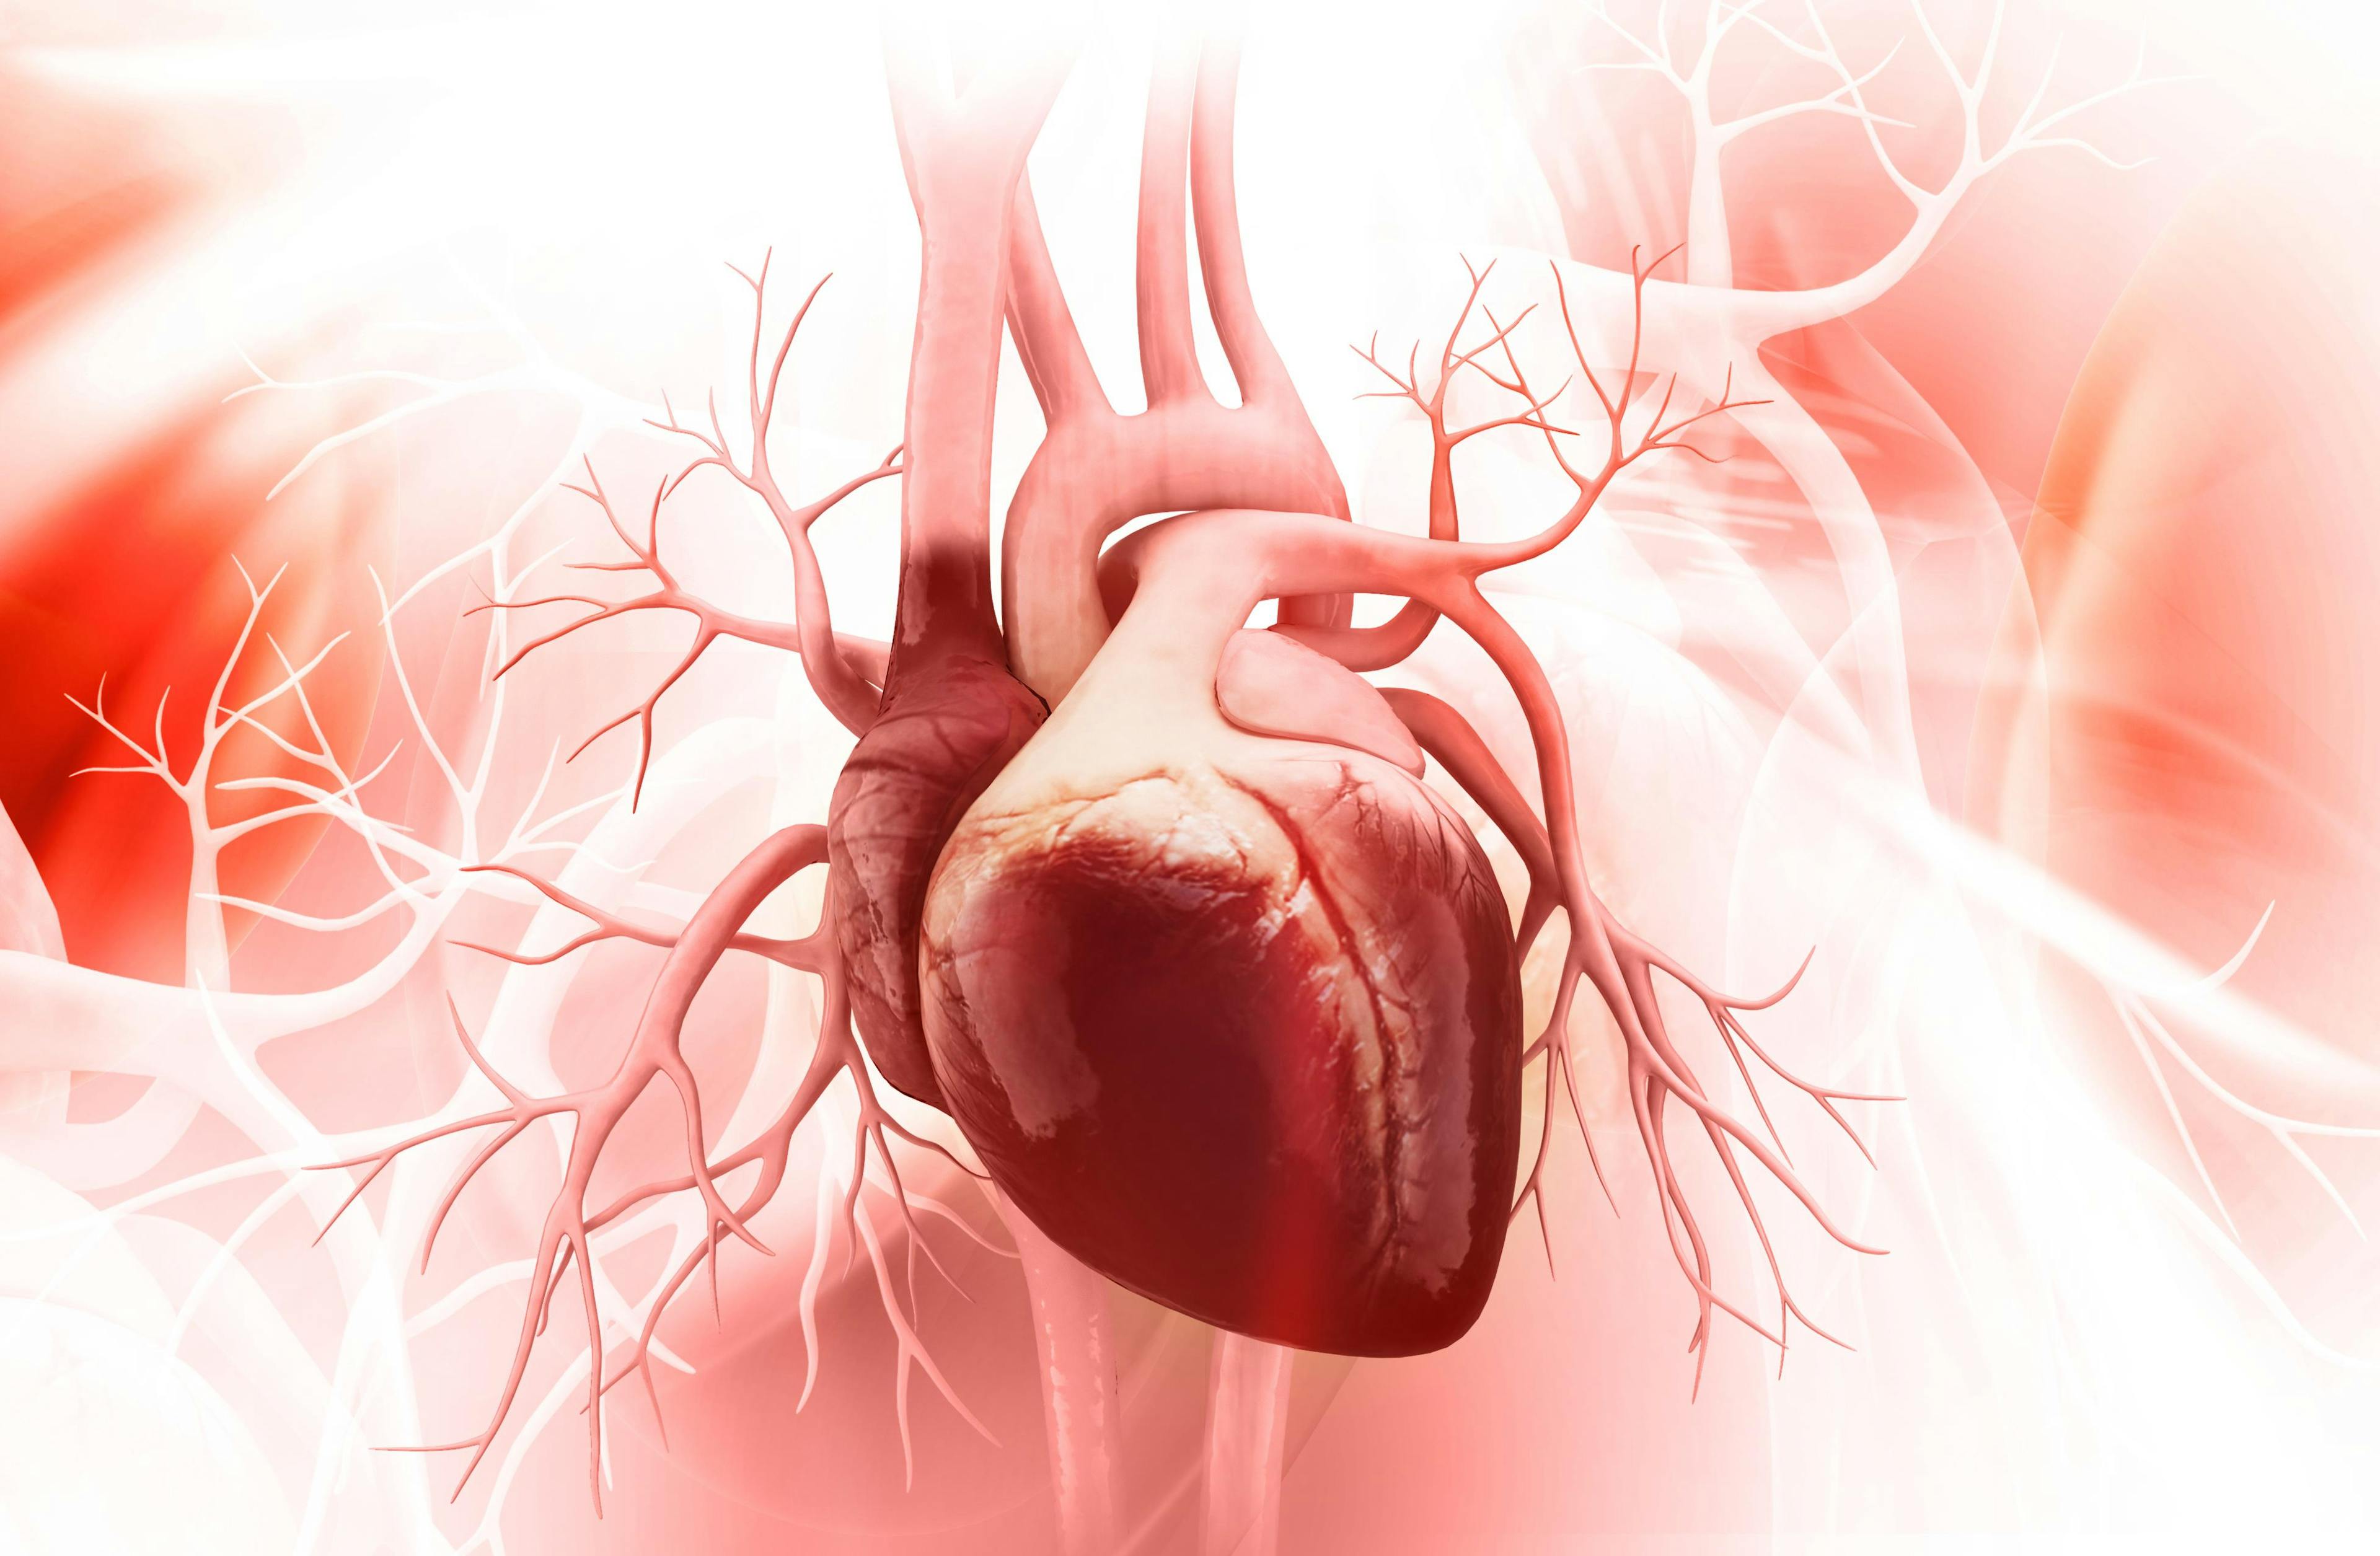 Stock image of the cardiovascular system